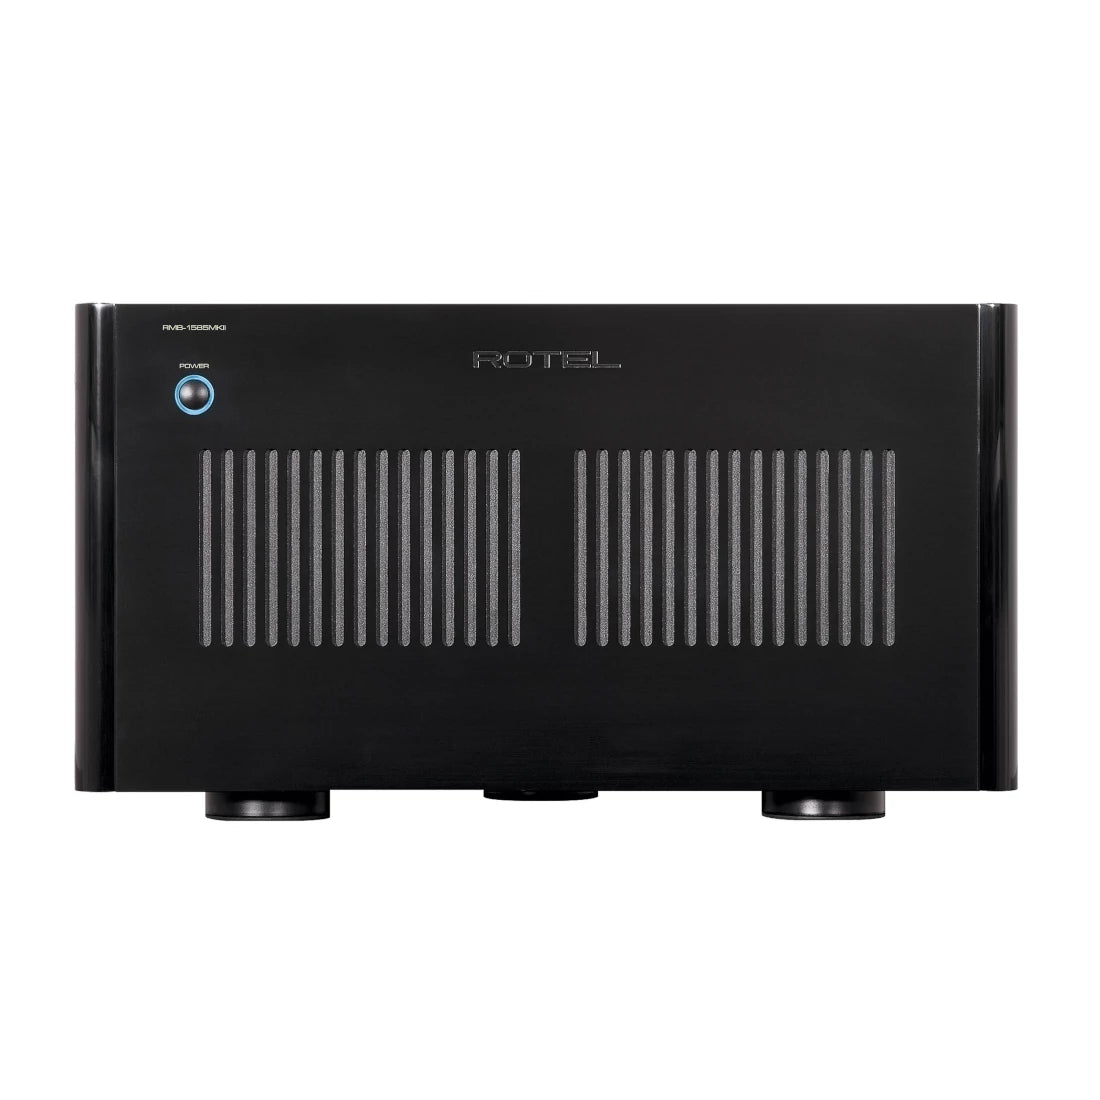 Rotel RMB-1585 MKII 5 channel Power Amplifier - Black